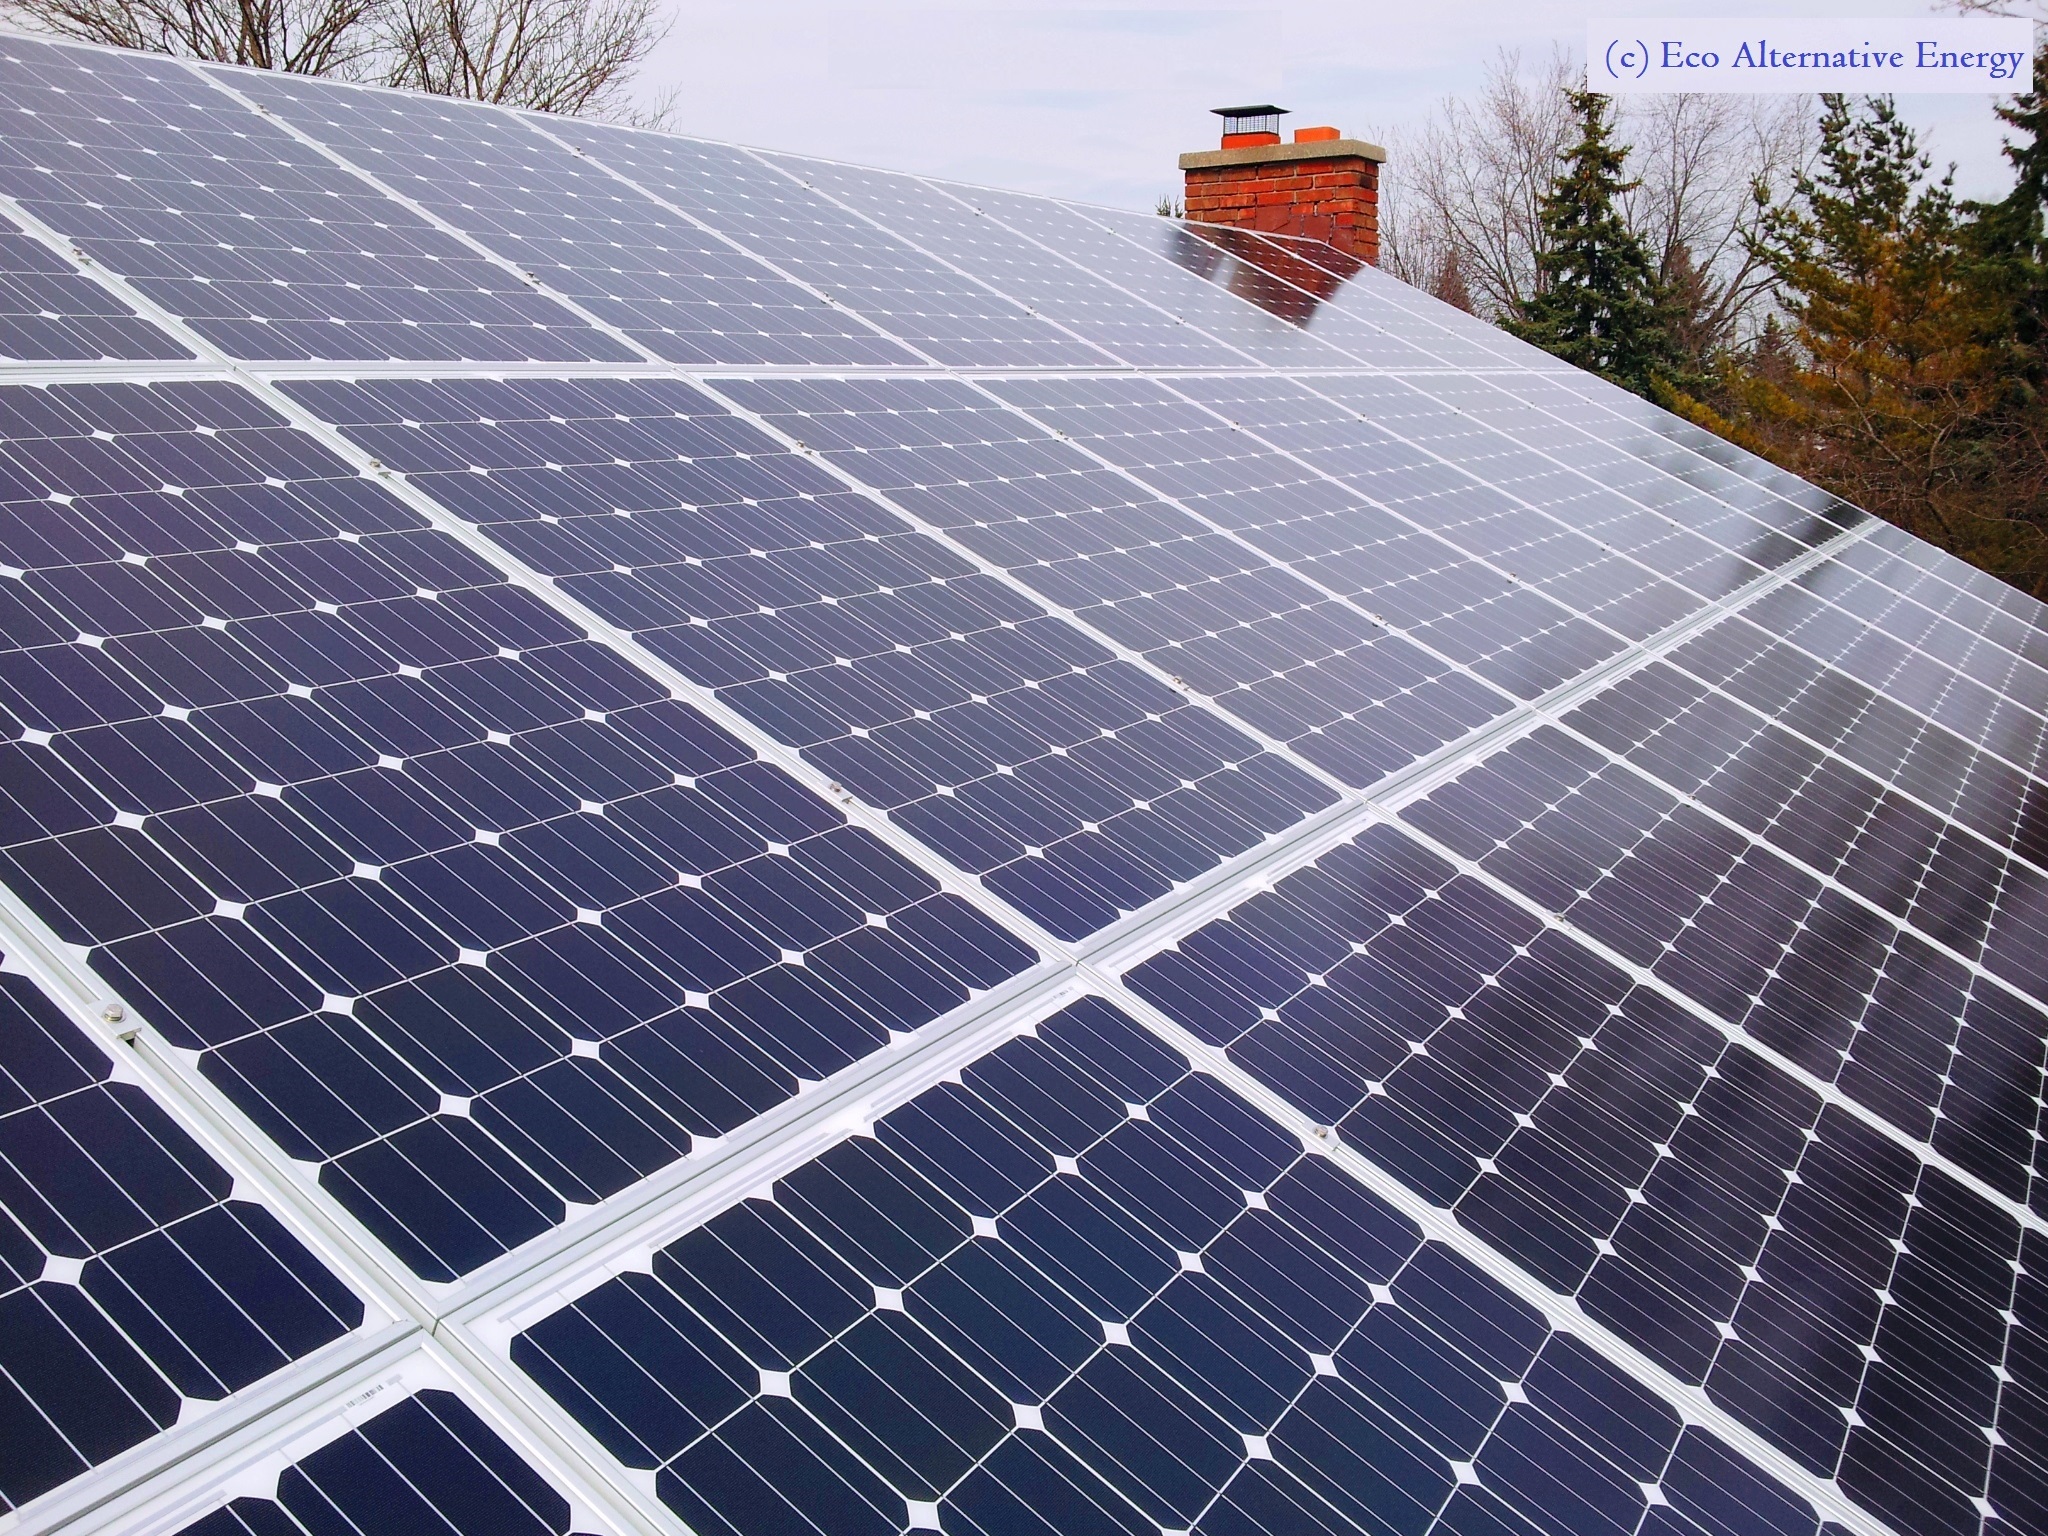 Solar System installed by Eco Alternative Energy recently on a 